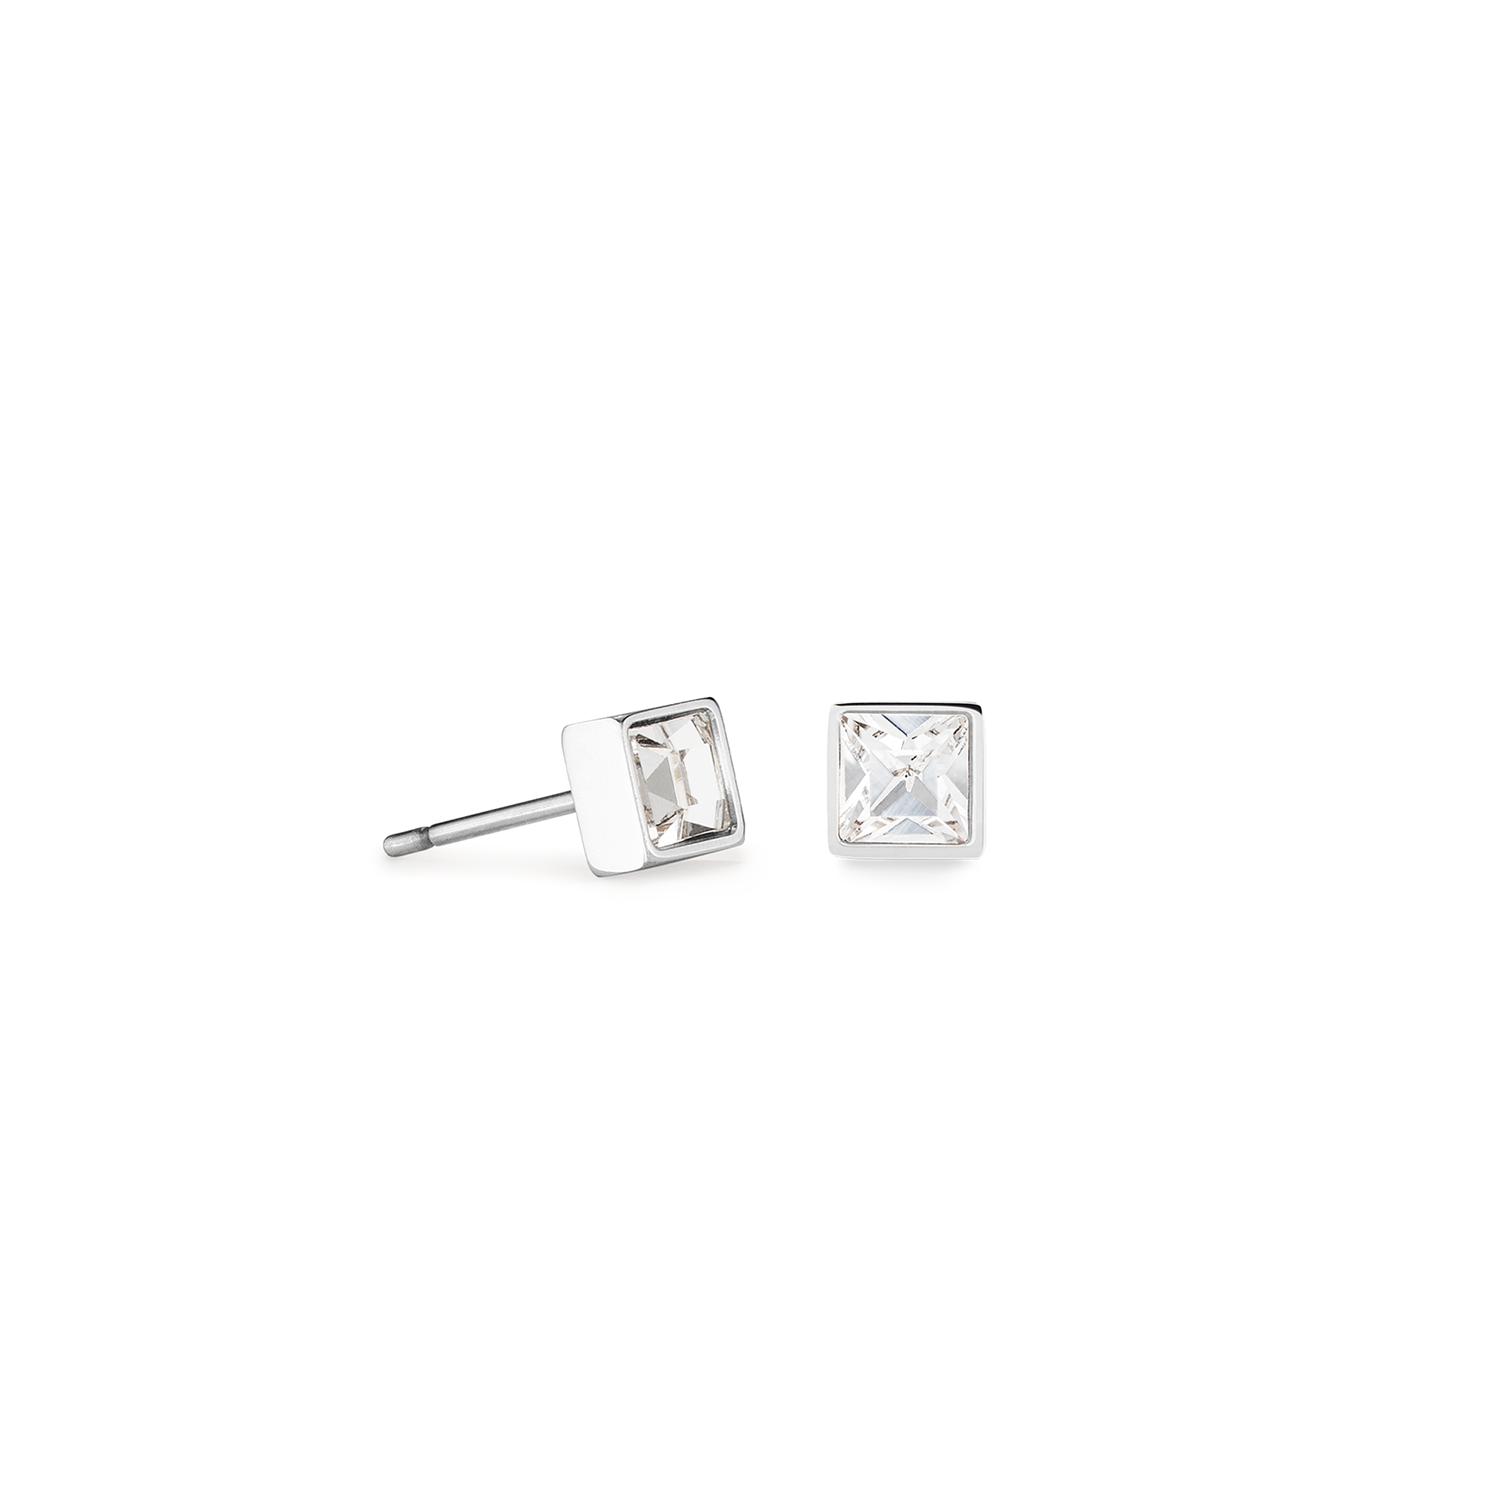 Brilliant Square Small Stud Earrings with Crystals 0501/21_1817 - Crystal Stainless Steel